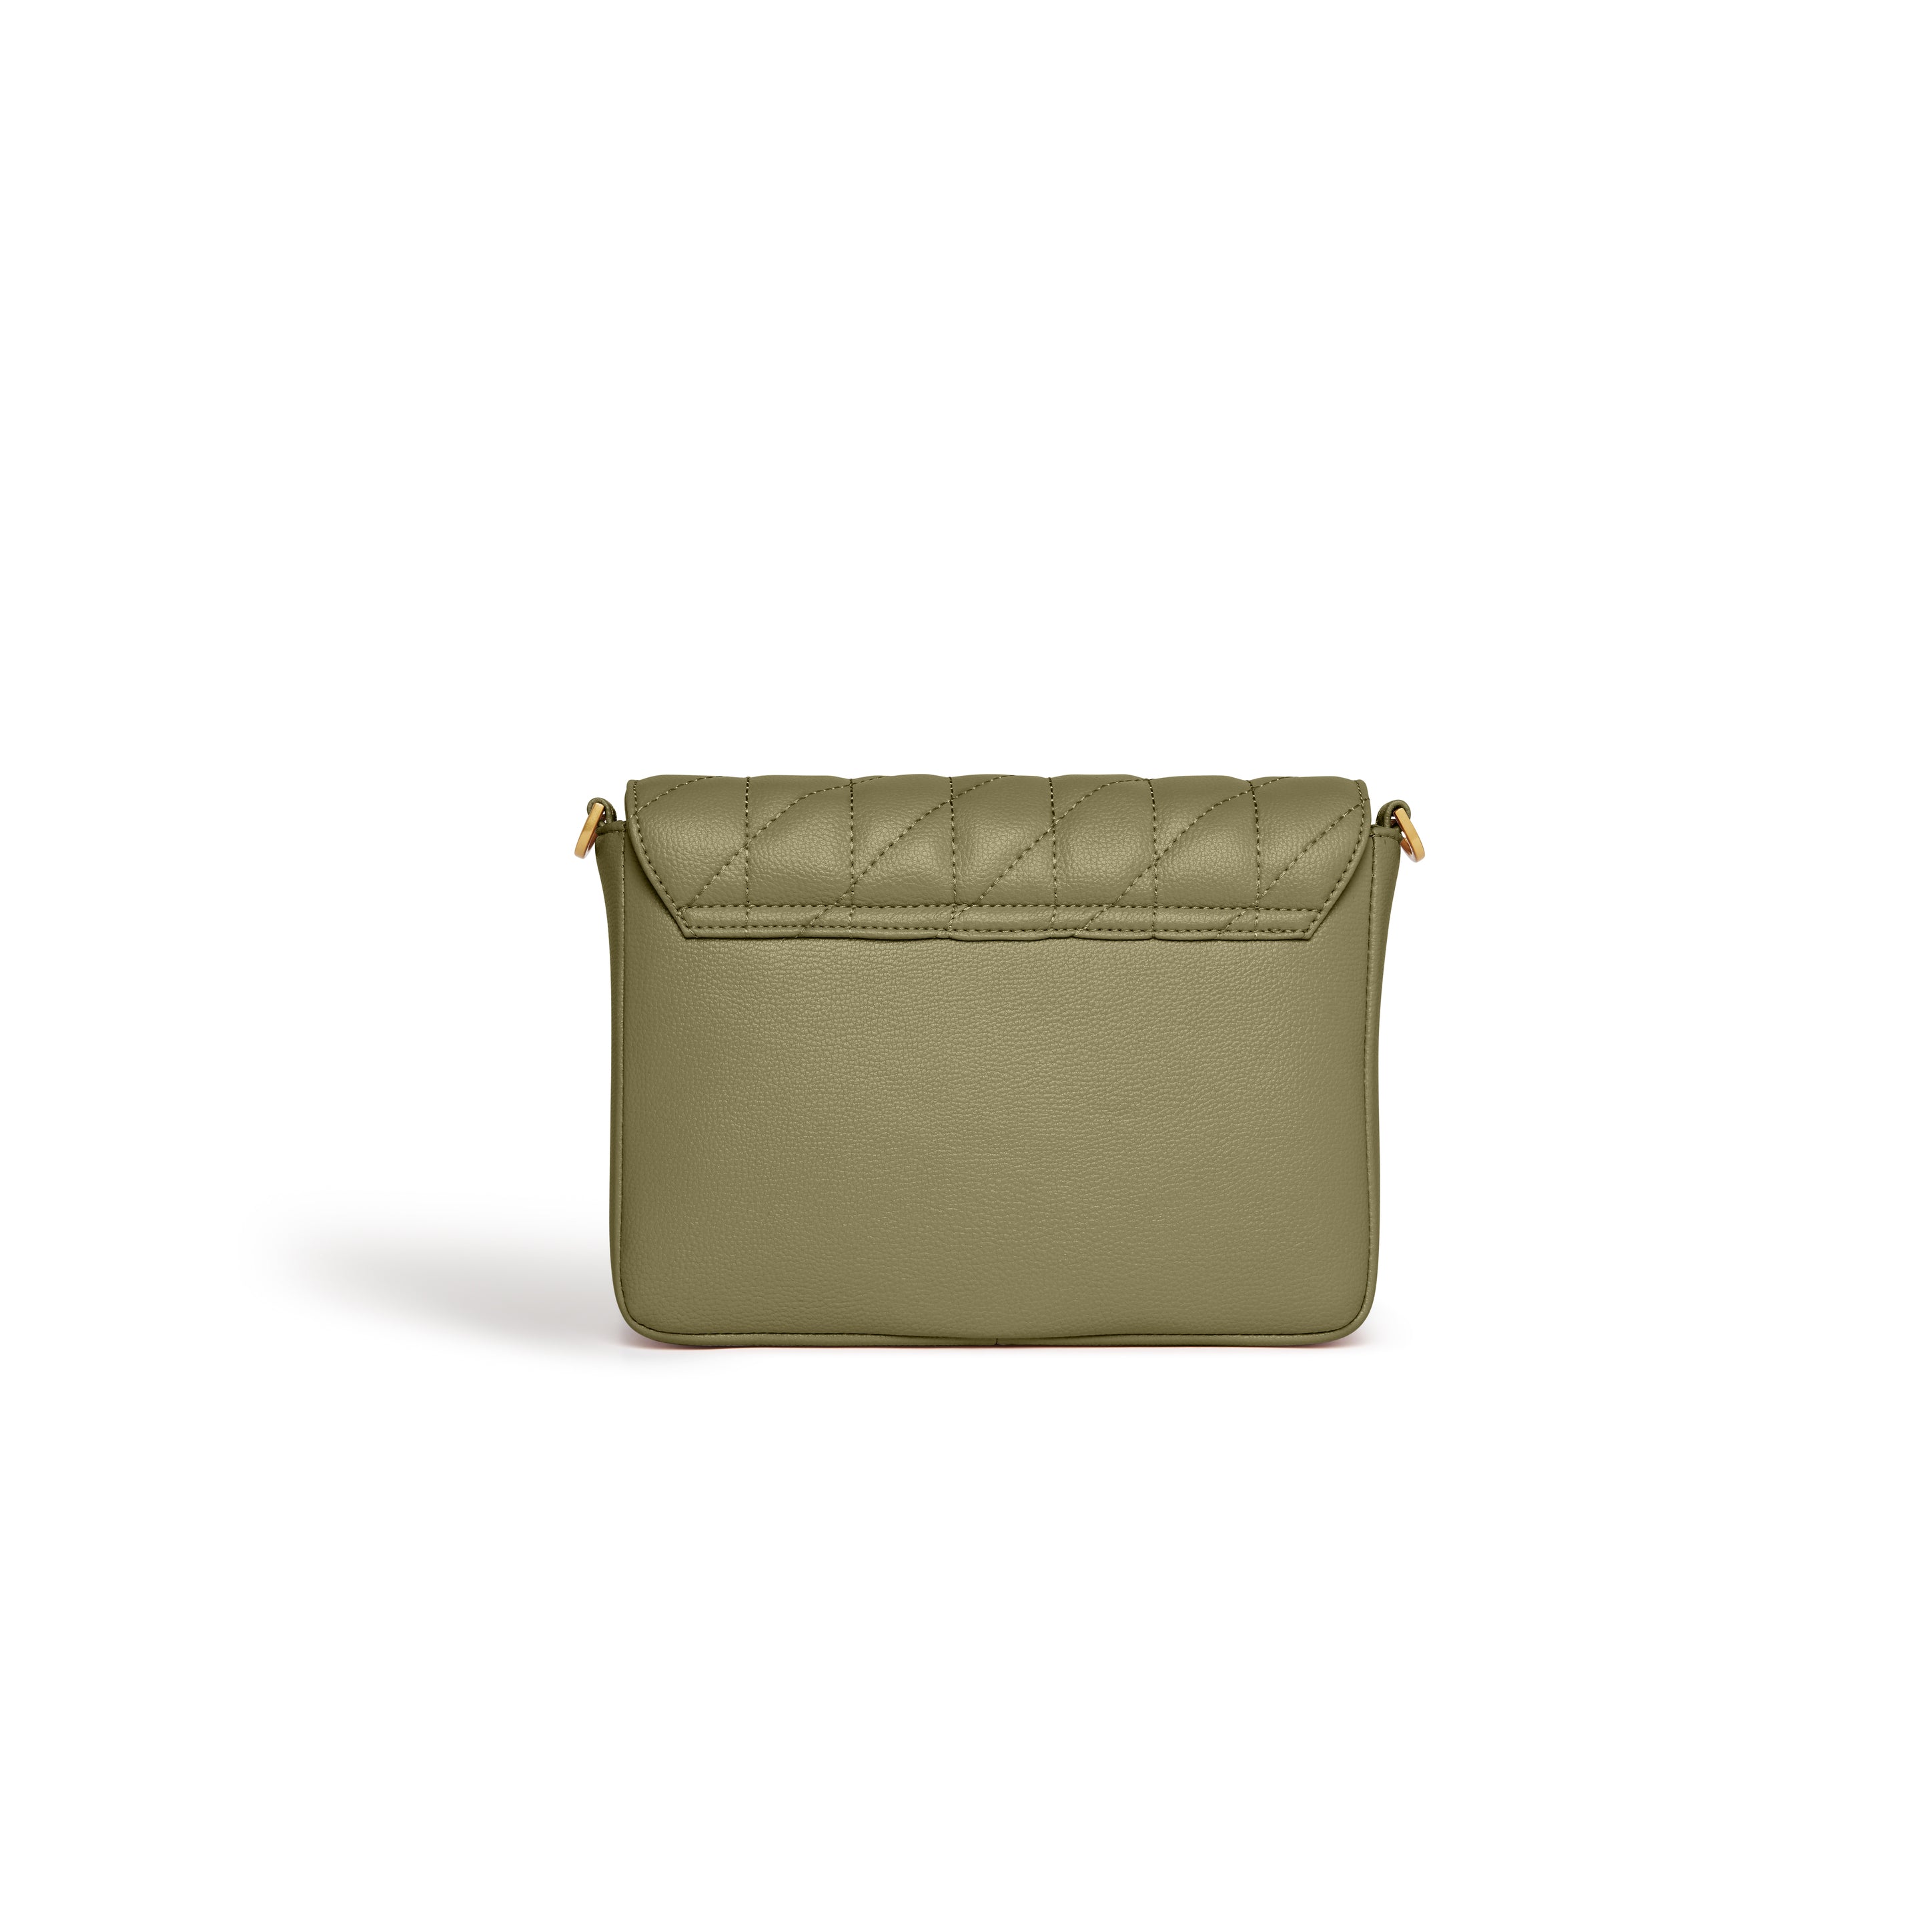 Green Shoulder Bag | Cruelty-Free Vegan Leather | Ethical Style